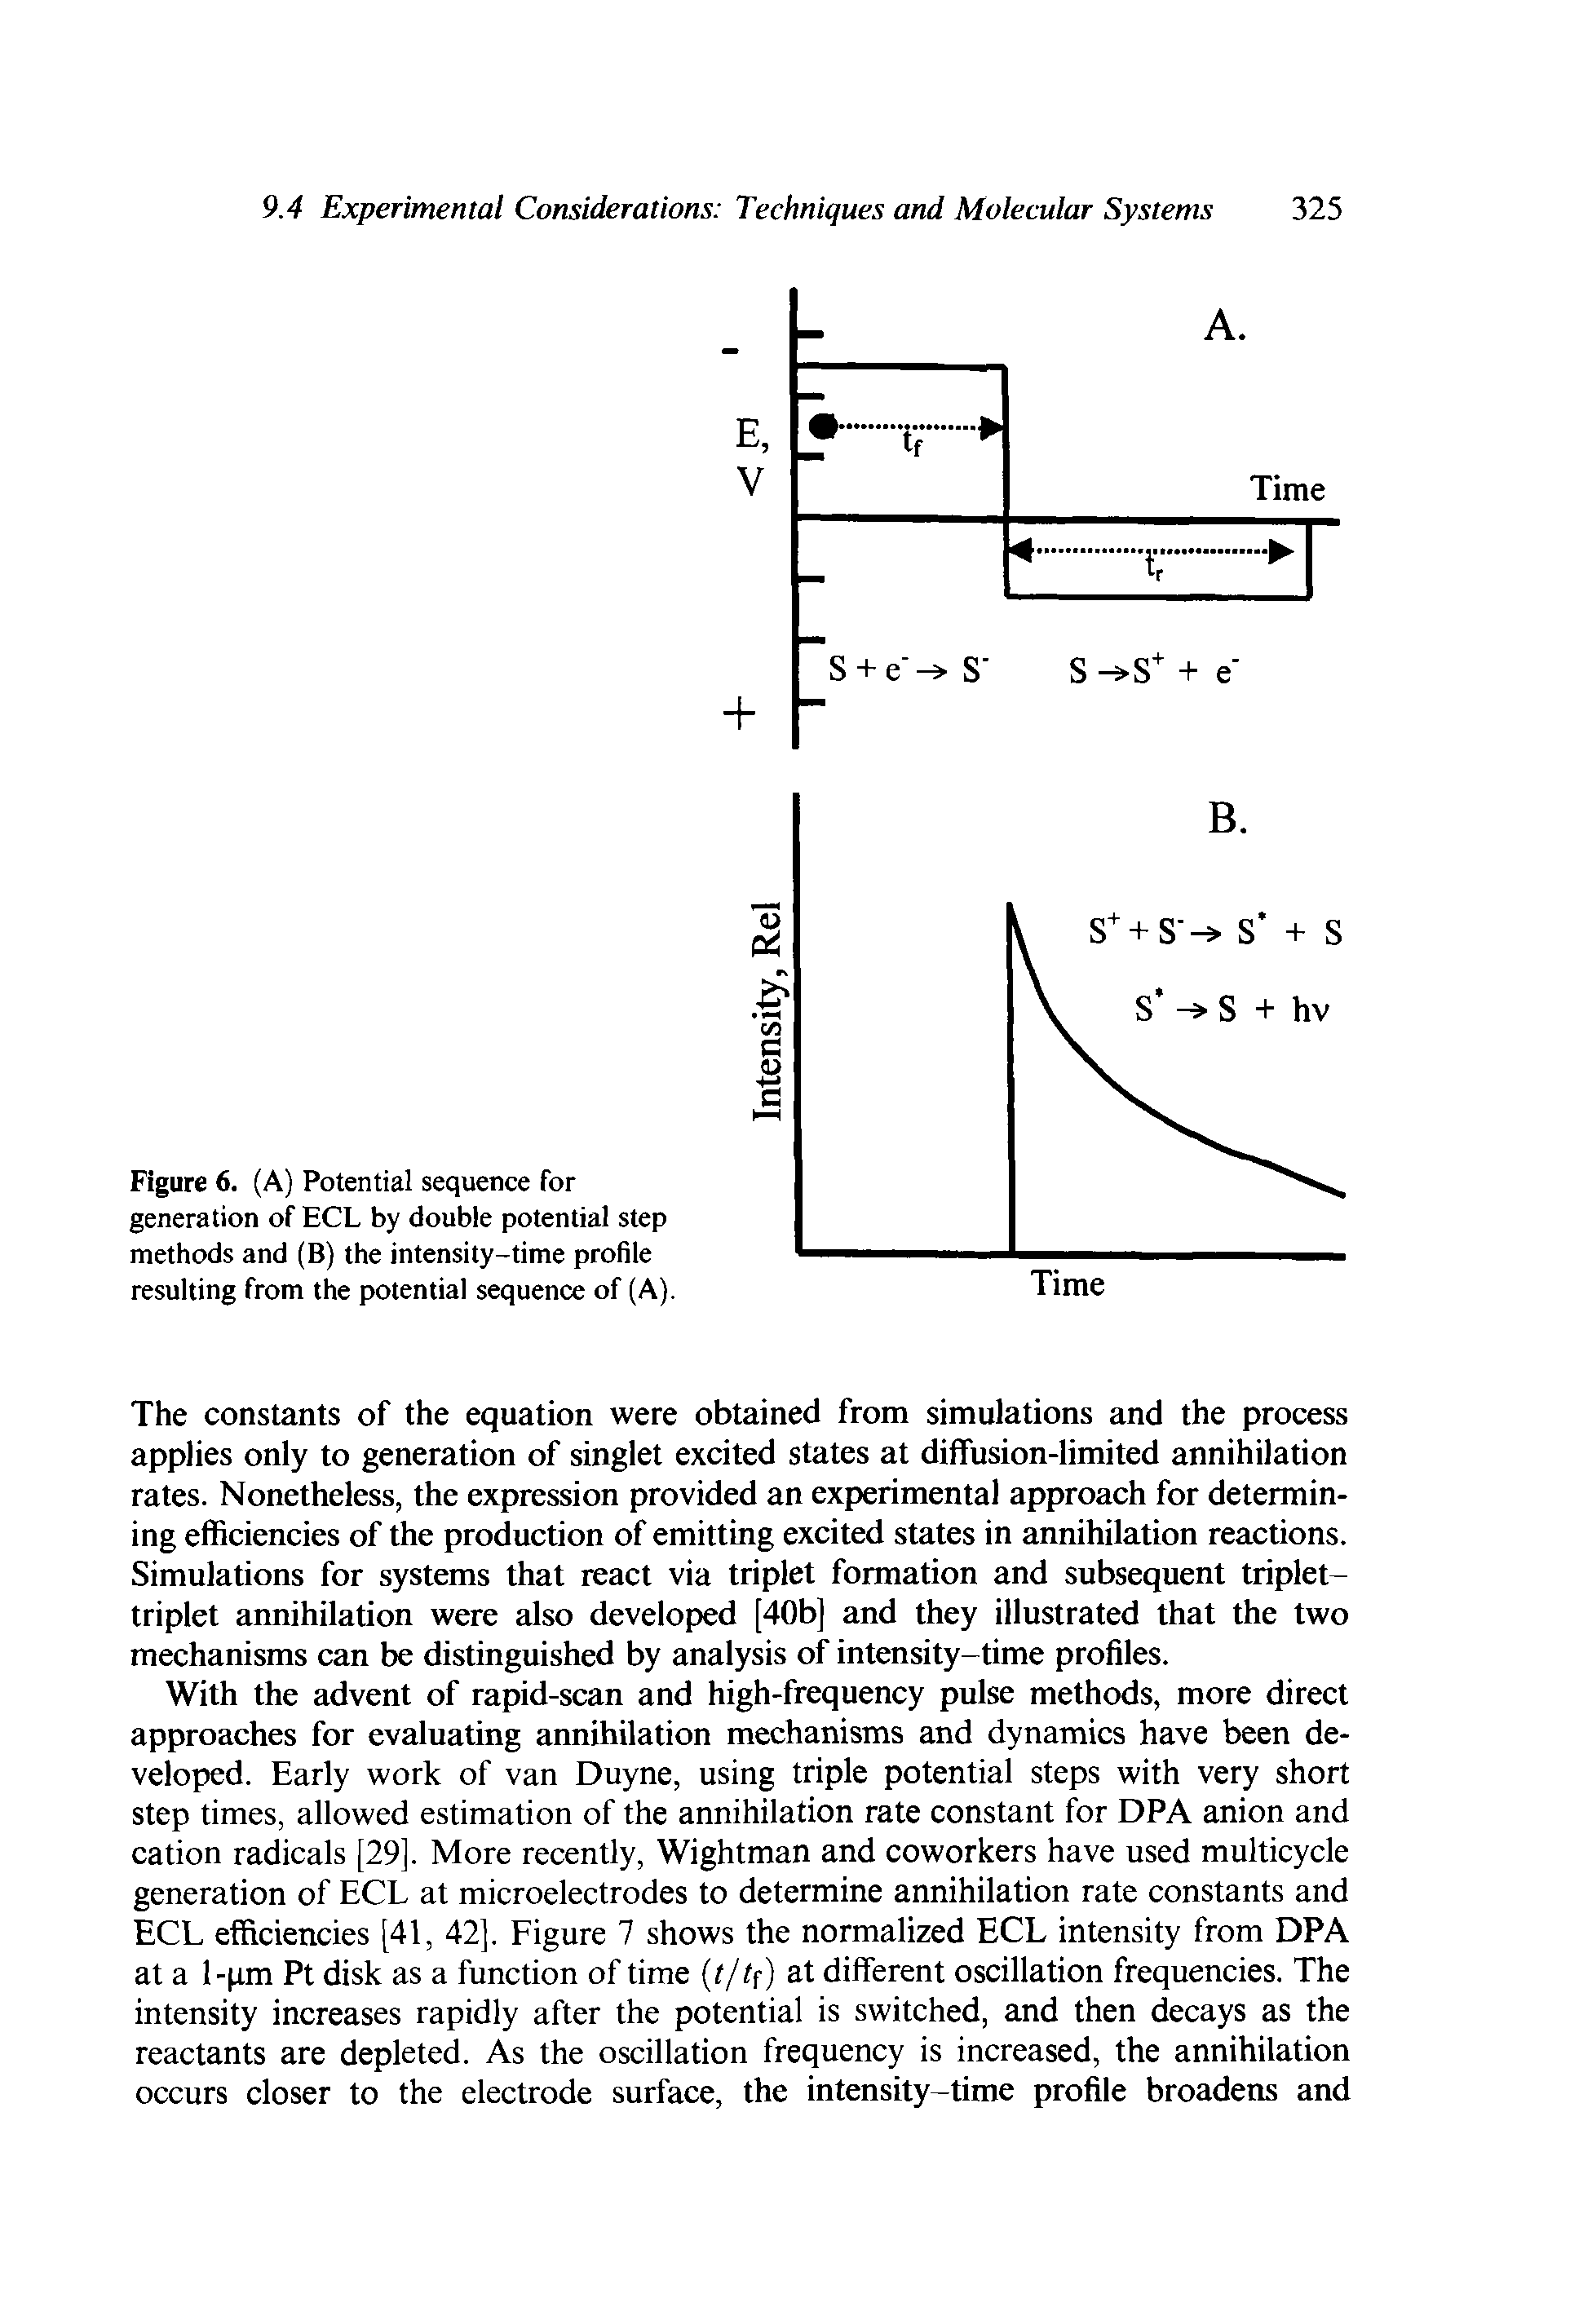 Figure 6. (A) Potential sequence for generation of ECL by double potential step methods and (B) the intensity-time profile resulting from the potential sequence of (A).